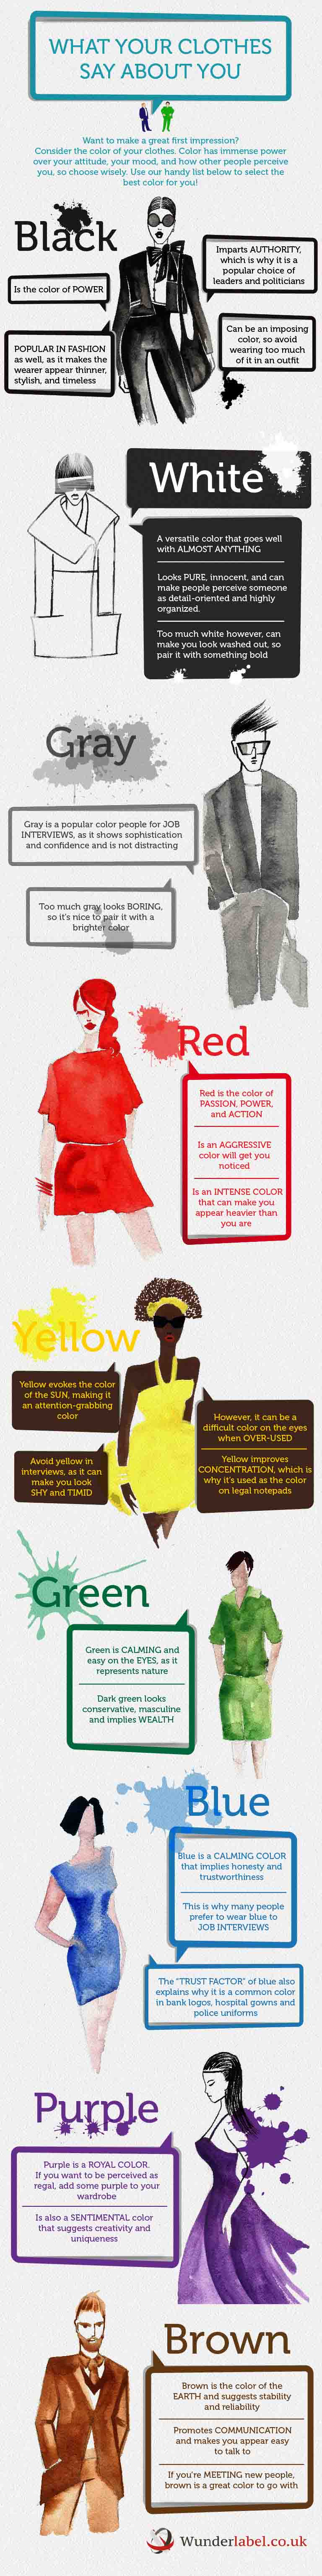 What Your Clothes Colors Say Infographic